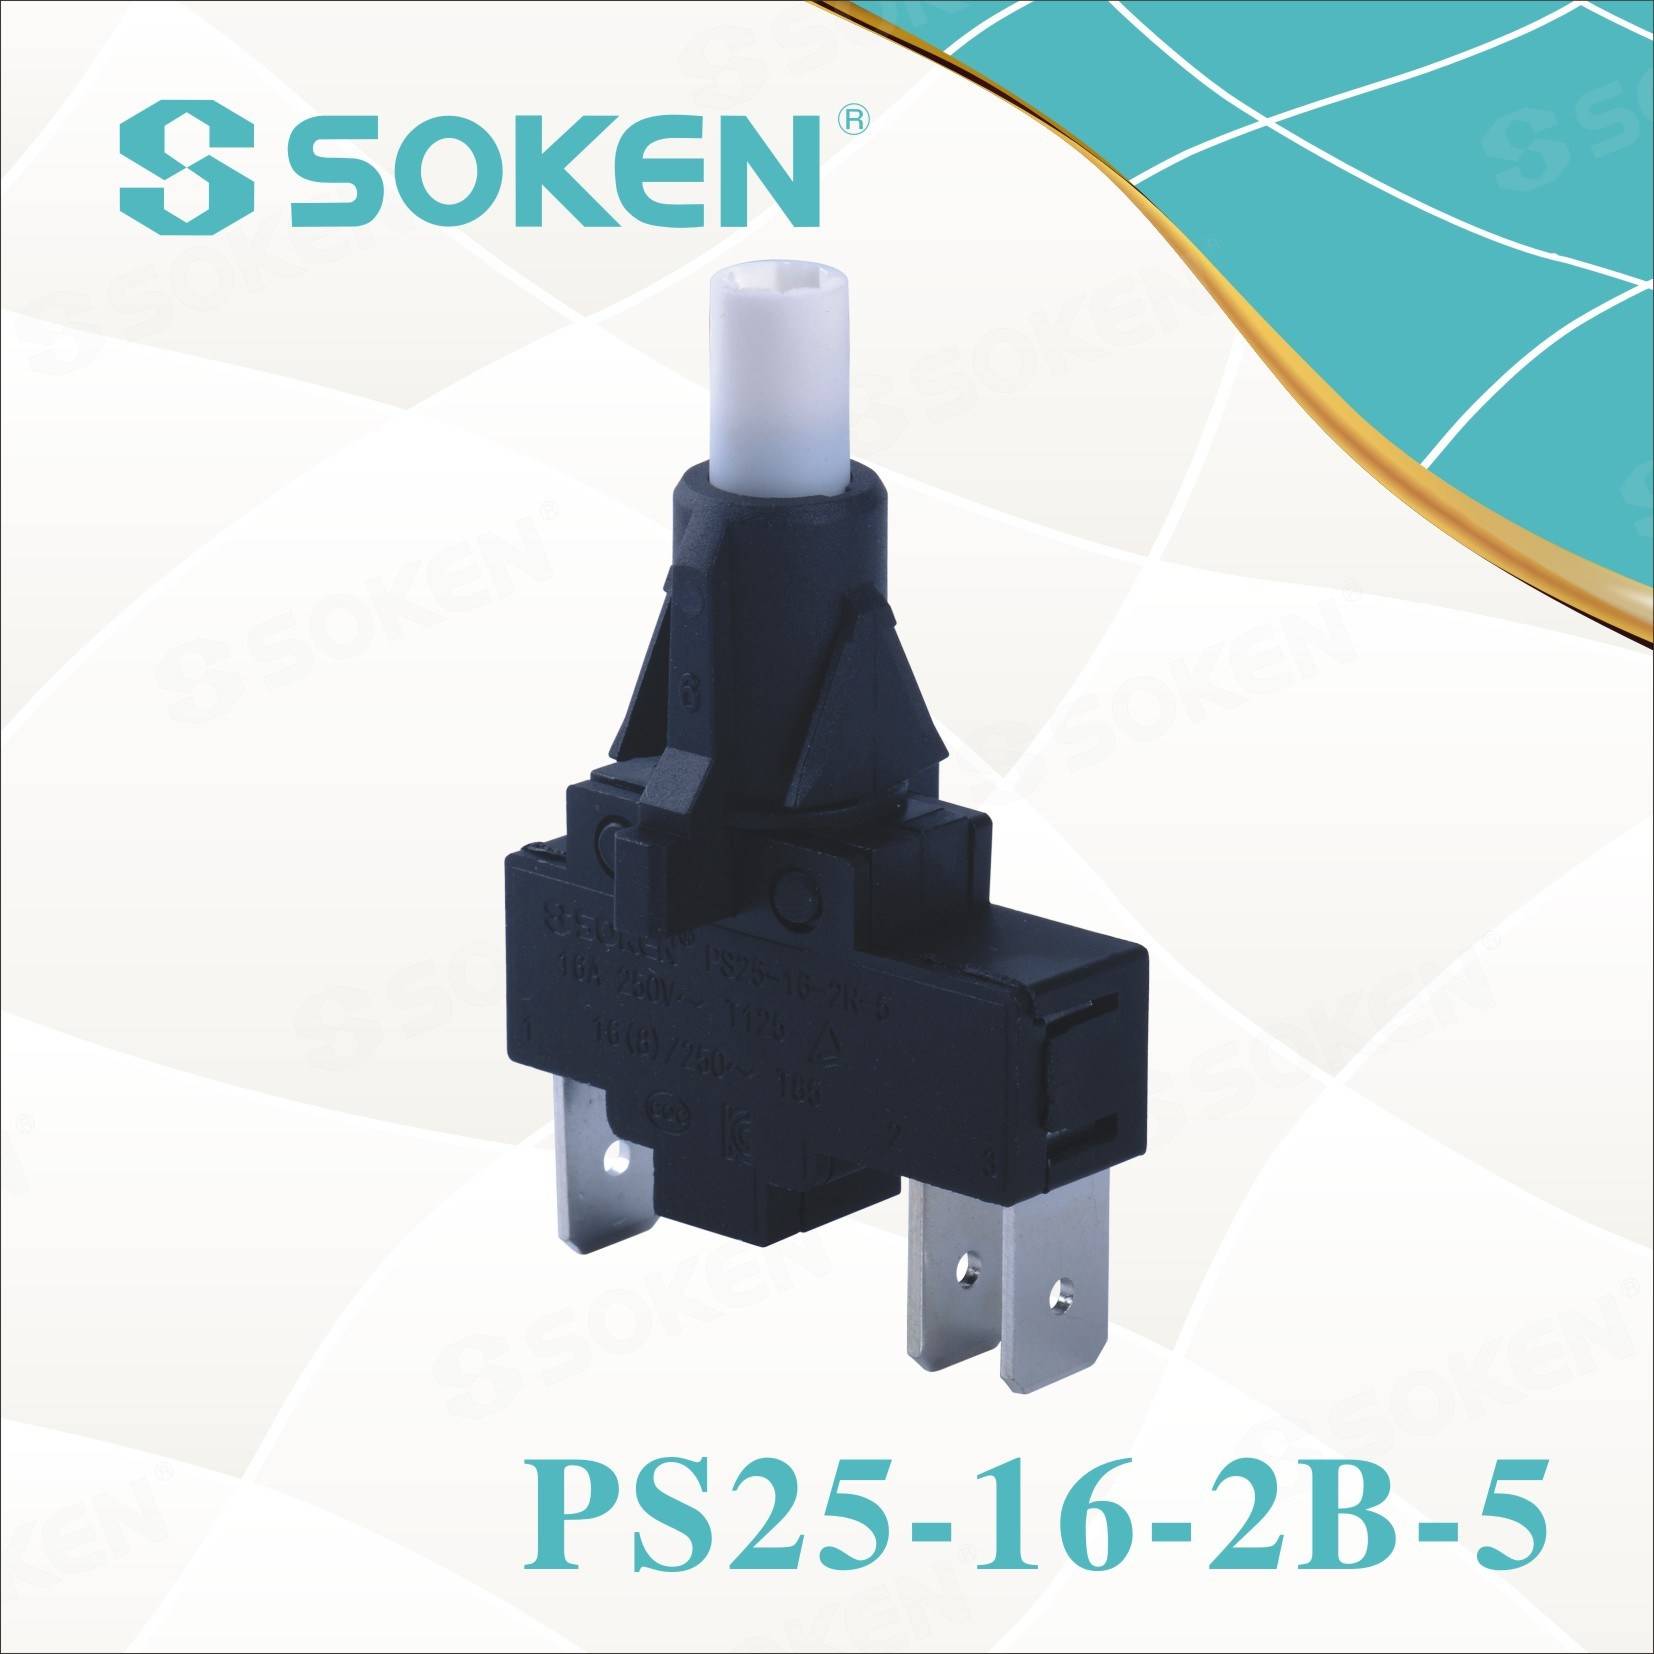 China Gold Supplier for Tactile Switch Led -
 Soken Push Button Switch PS25-16-2b-5 – Master Soken Electrical